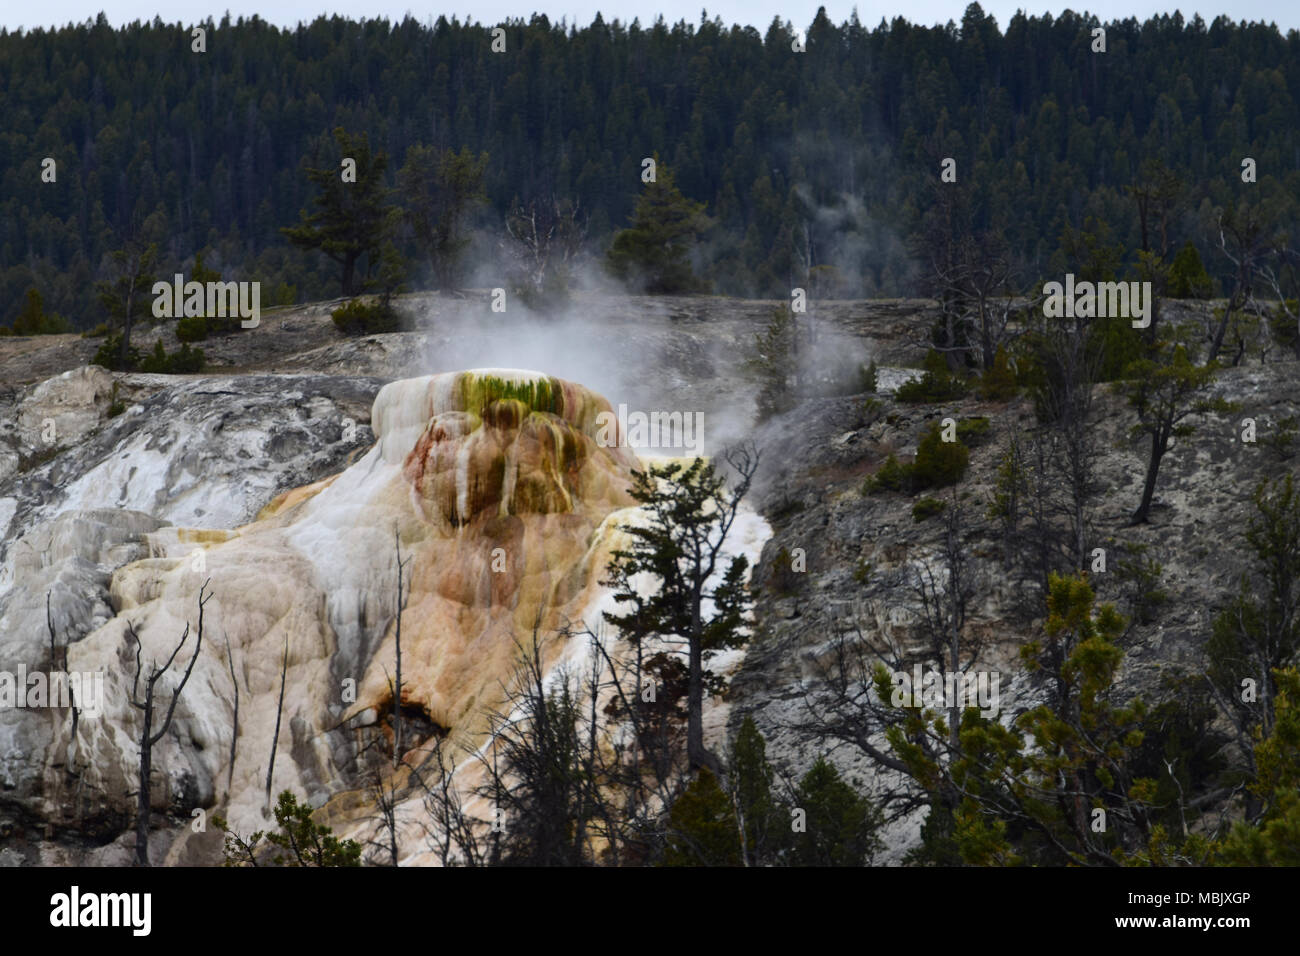 A geyser in the Yellowstone National Park, USA Stock Photo